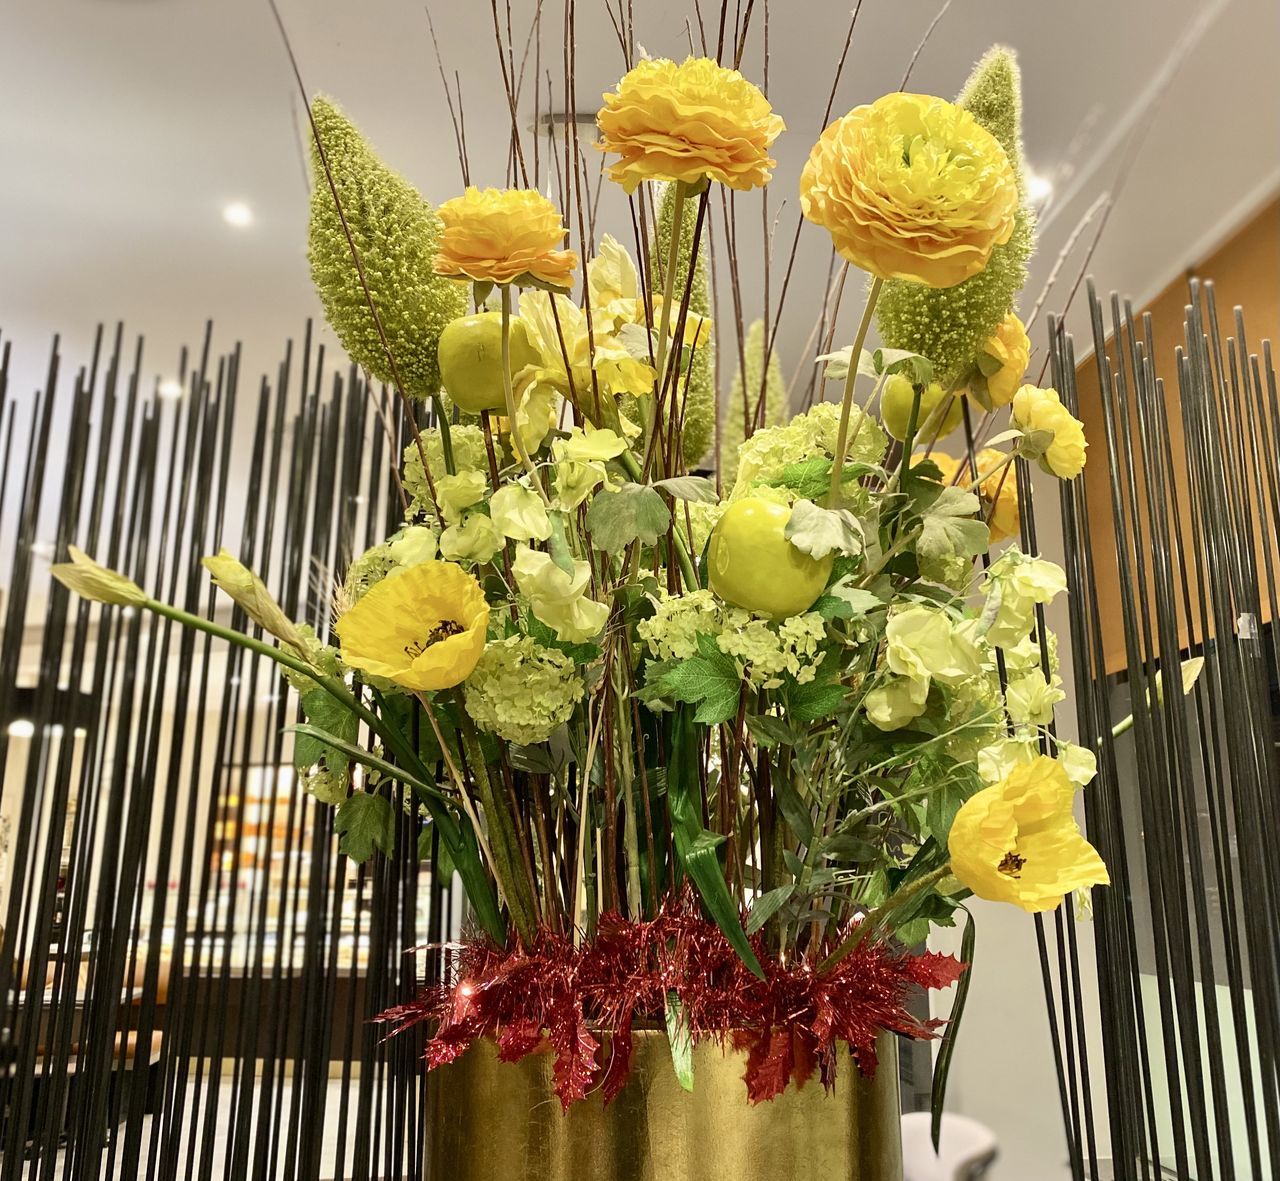 floristry, yellow, floral design, flower, plant, flowering plant, nature, no people, freshness, bouquet, centrepiece, beauty in nature, decoration, indoors, close-up, green, food